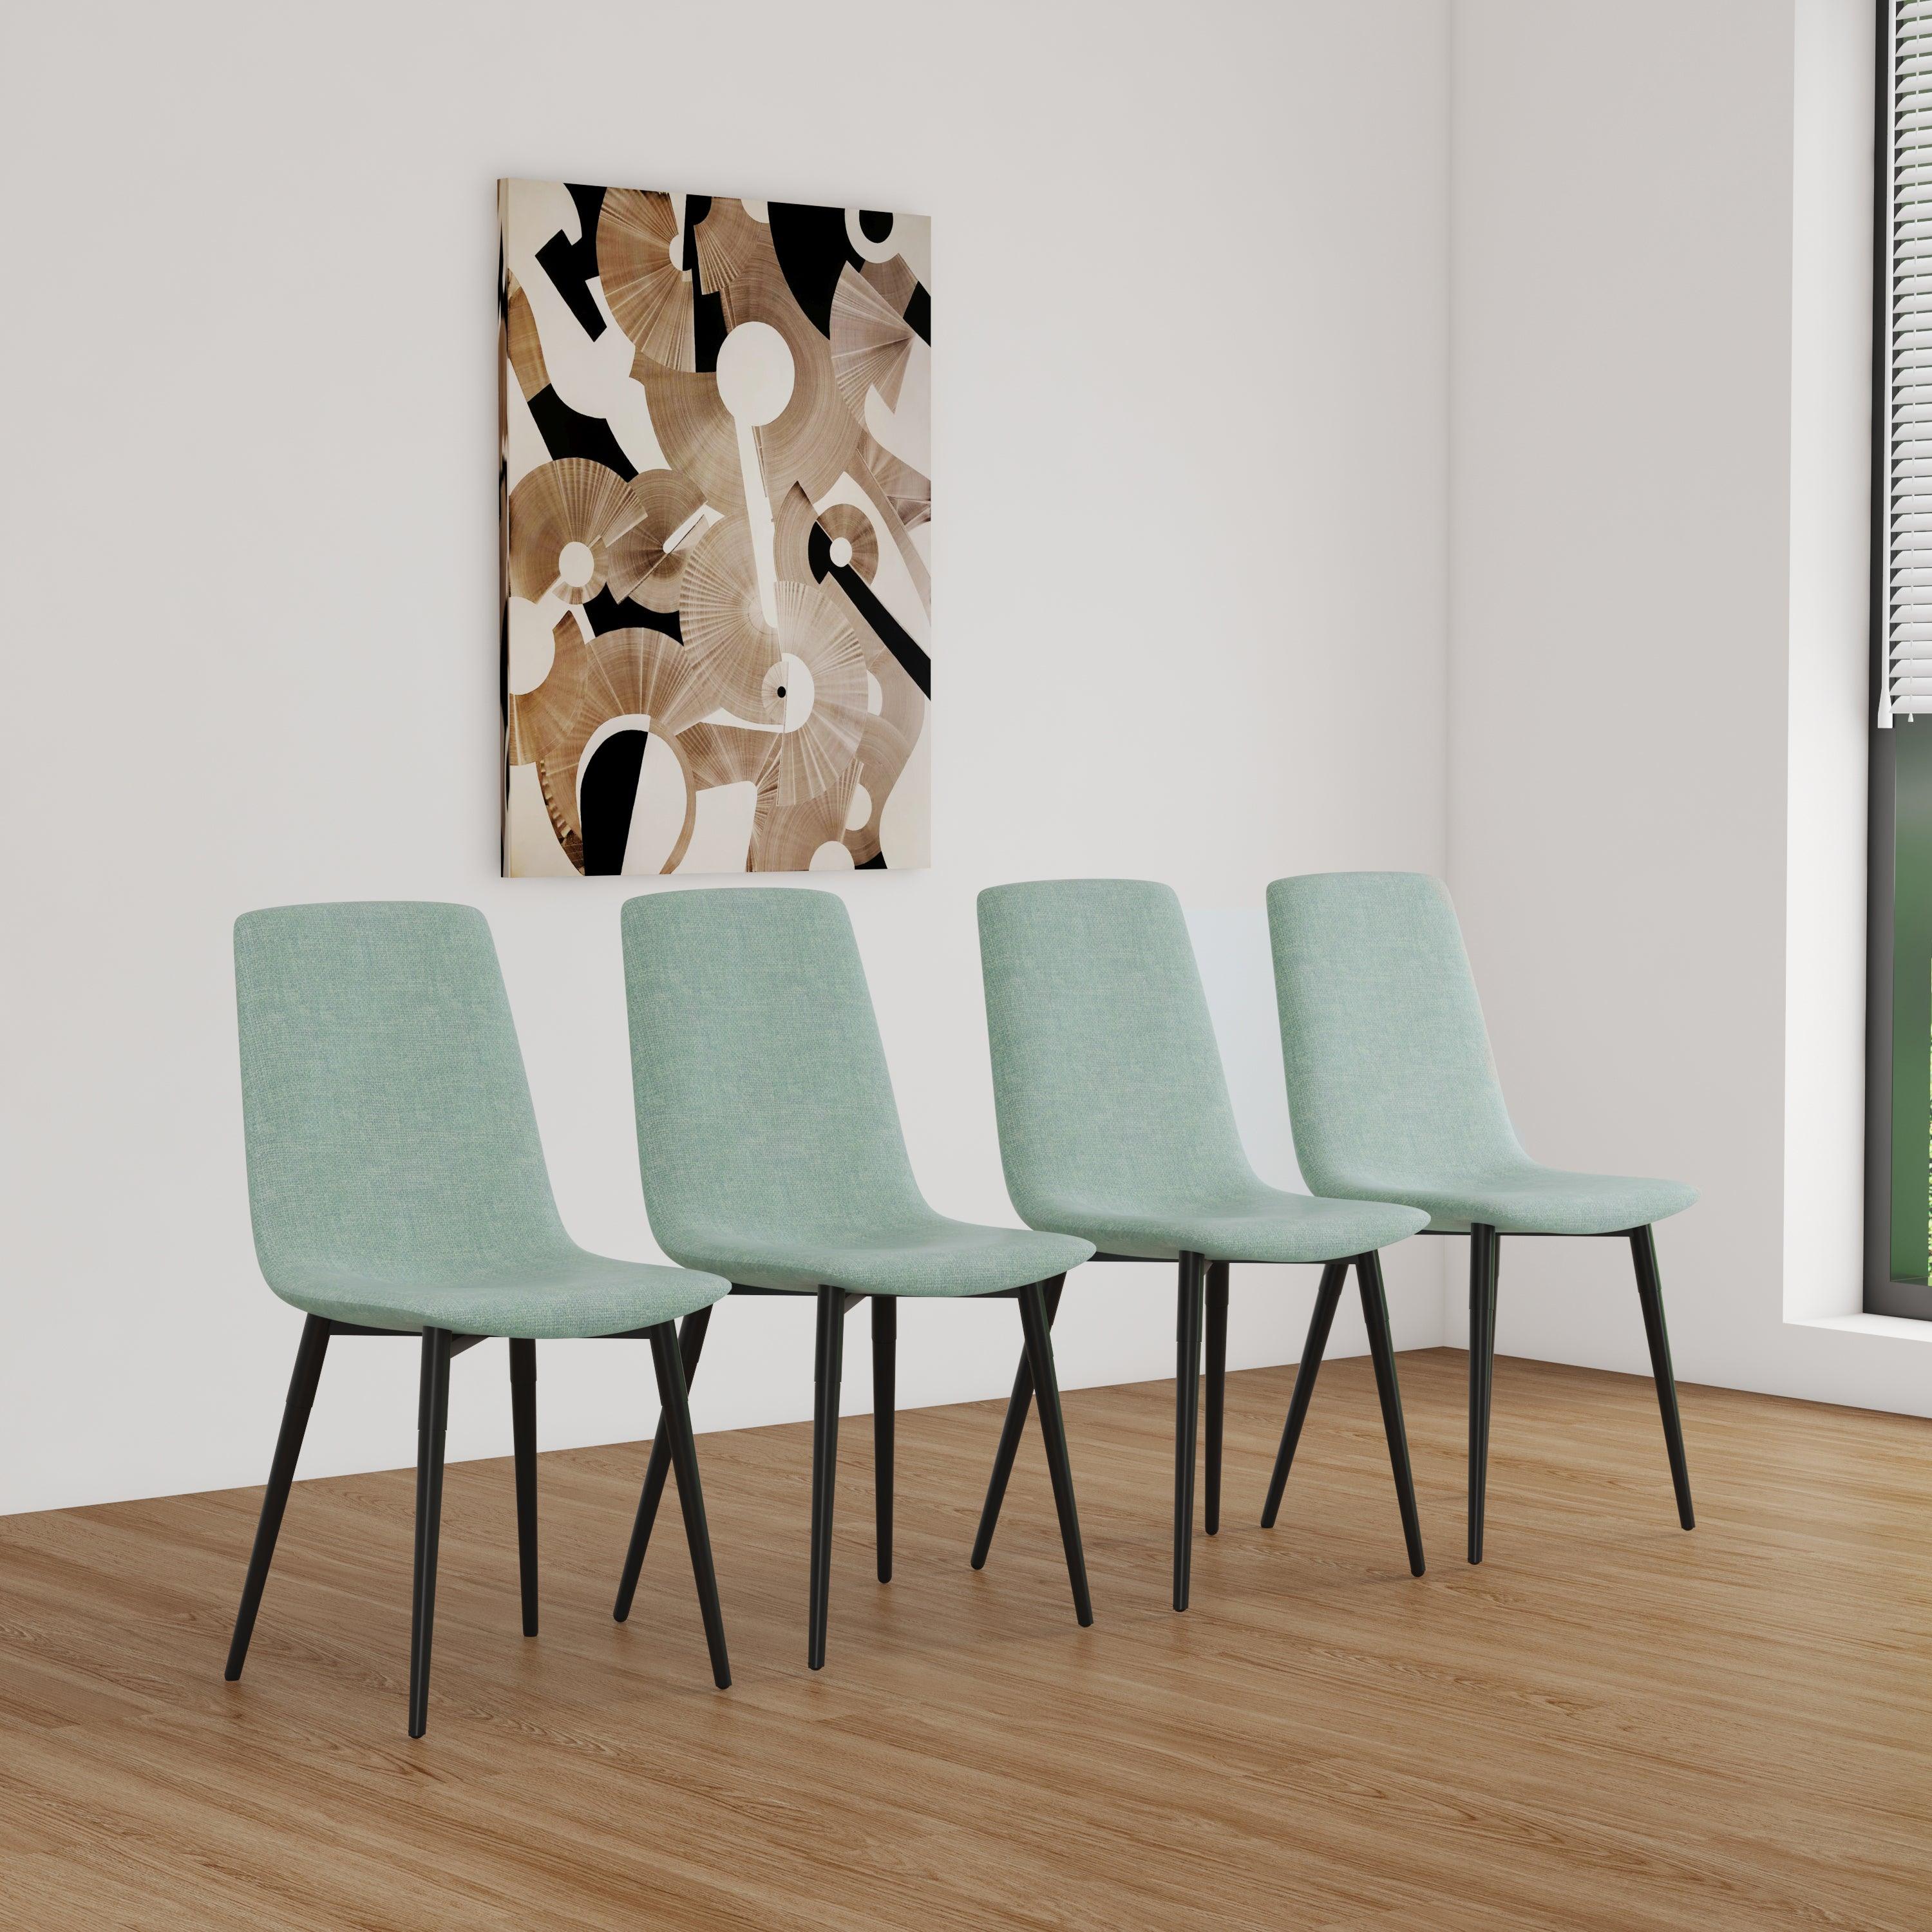 🆓🚛 Dining Chairs Set Of 4, Modern Kitchen Dining Room Chairs, Upholstered Dining Accent Chairs in Linen Cushion Seat & Sturdy Black Metal Legs (Light Green)